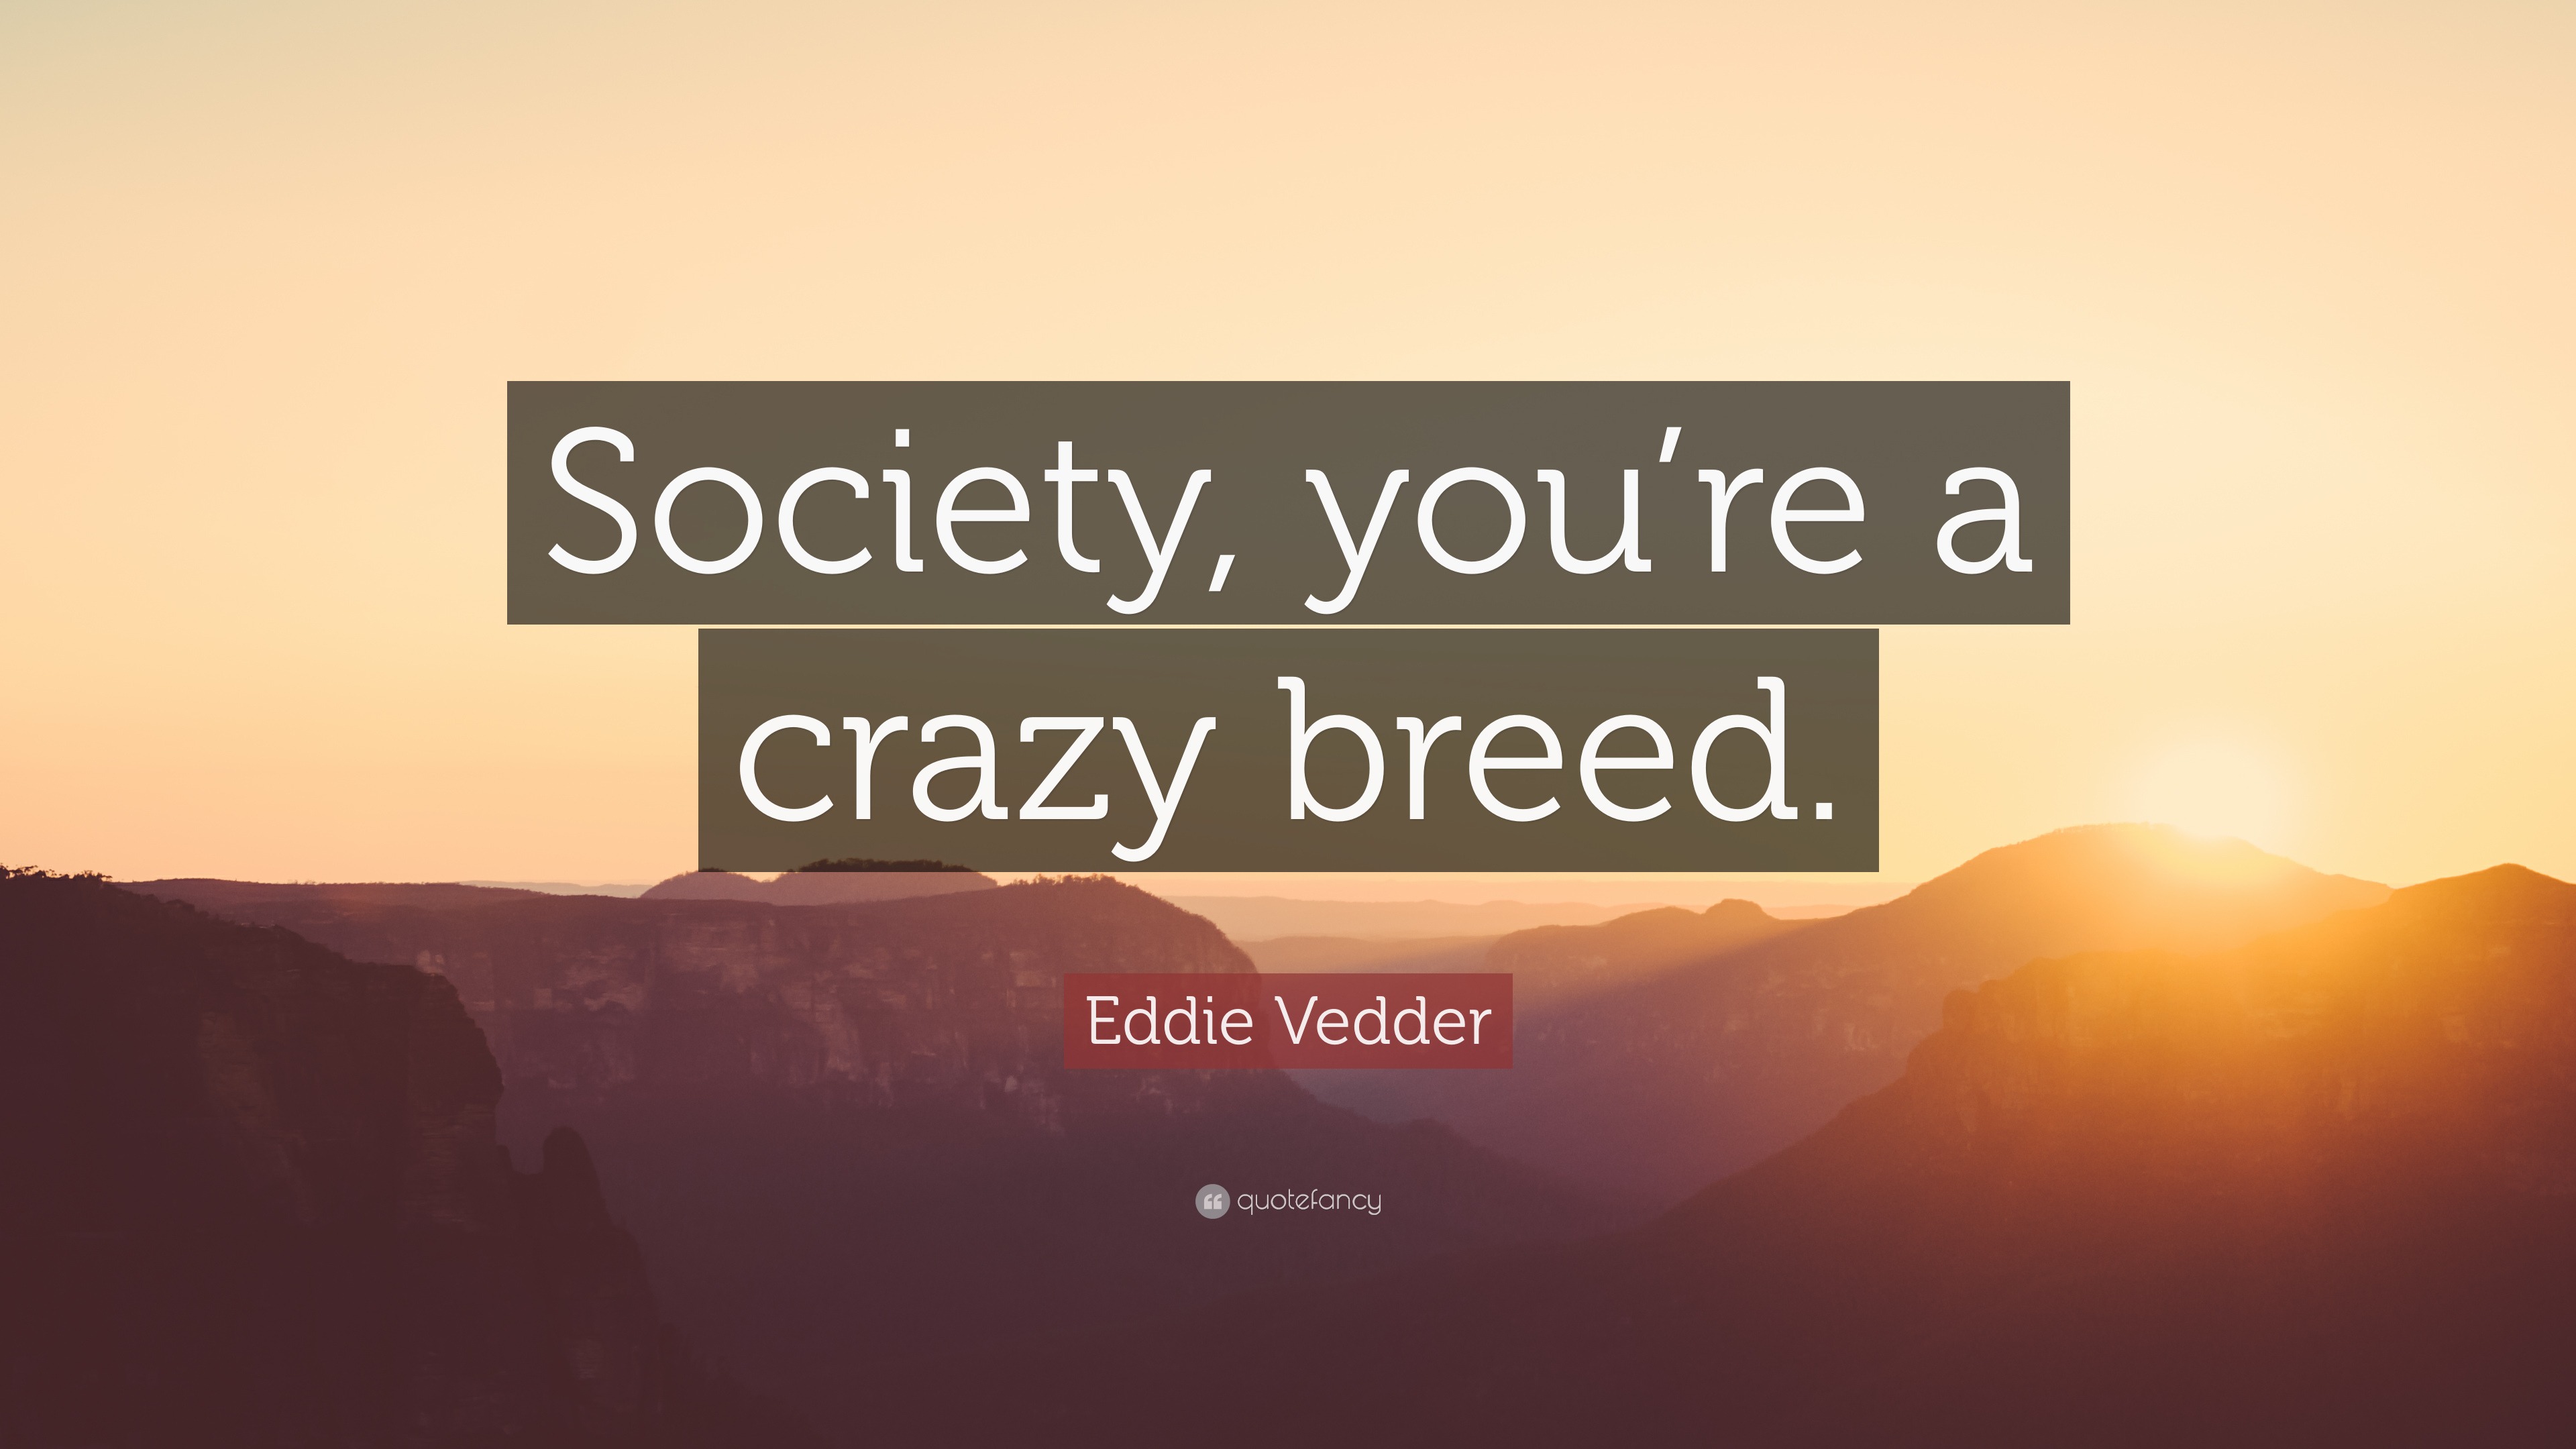 Eddie Vedder Quote: "Society, you're a crazy breed." (12 ...